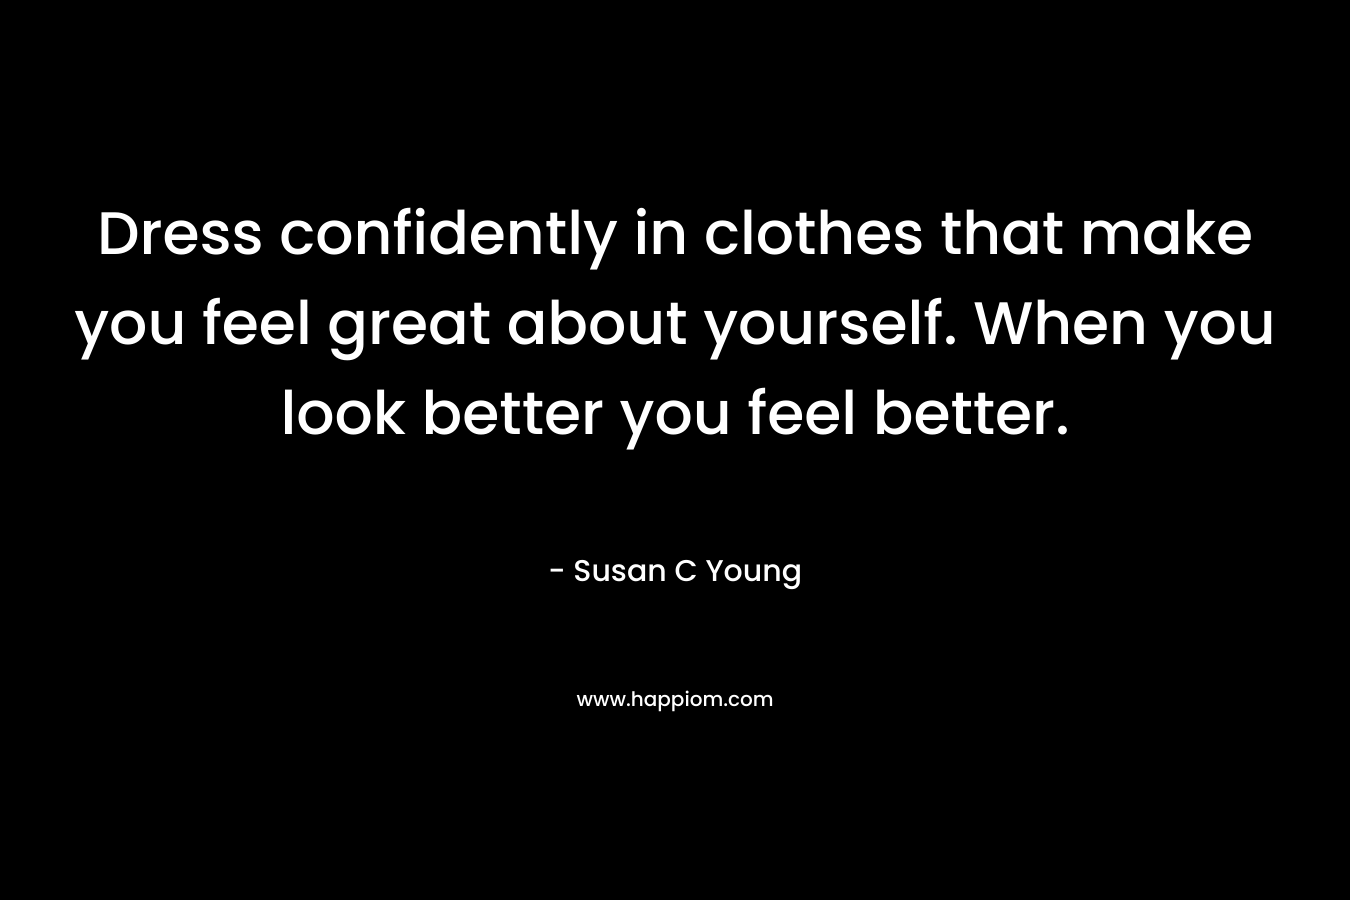 Dress confidently in clothes that make you feel great about yourself. When you look better you feel better. – Susan C Young